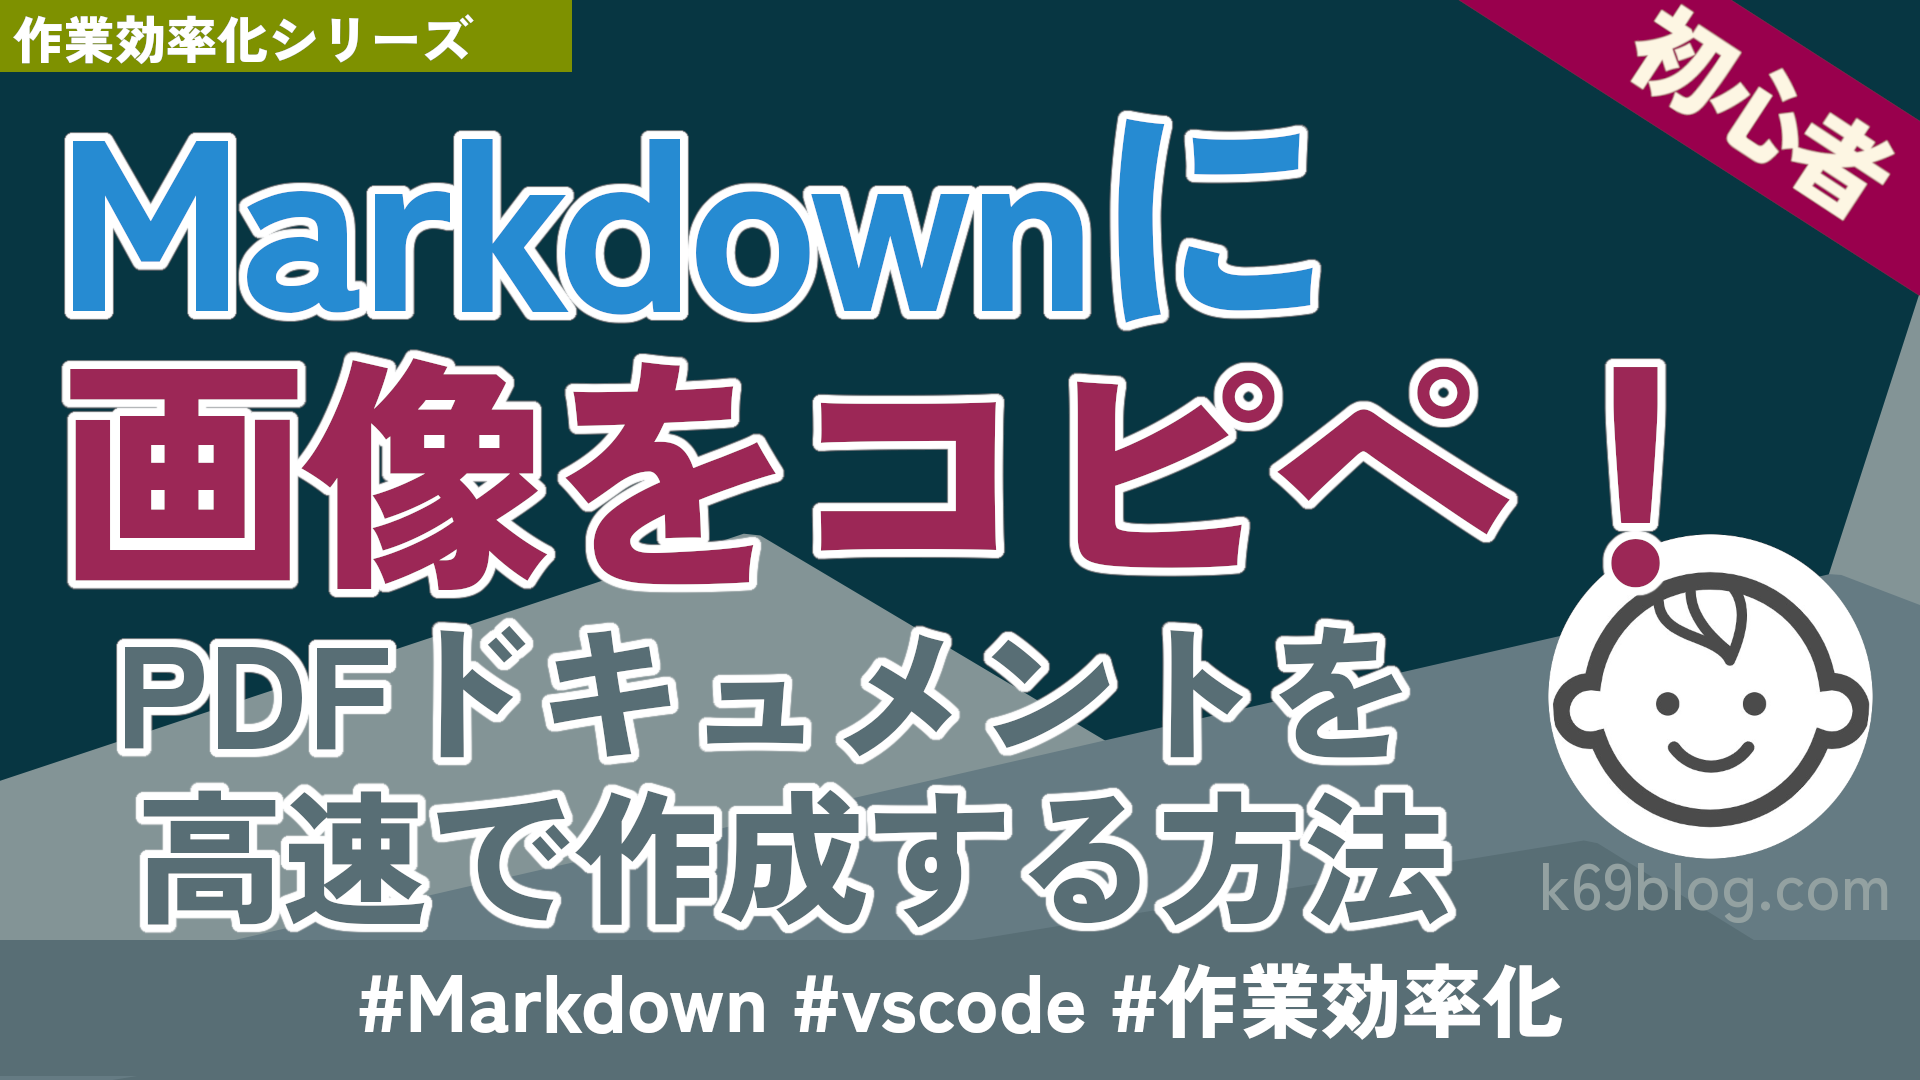 Cover Image for Markdownに画像コピペ！PDFドキュメントを高速で作成する方法